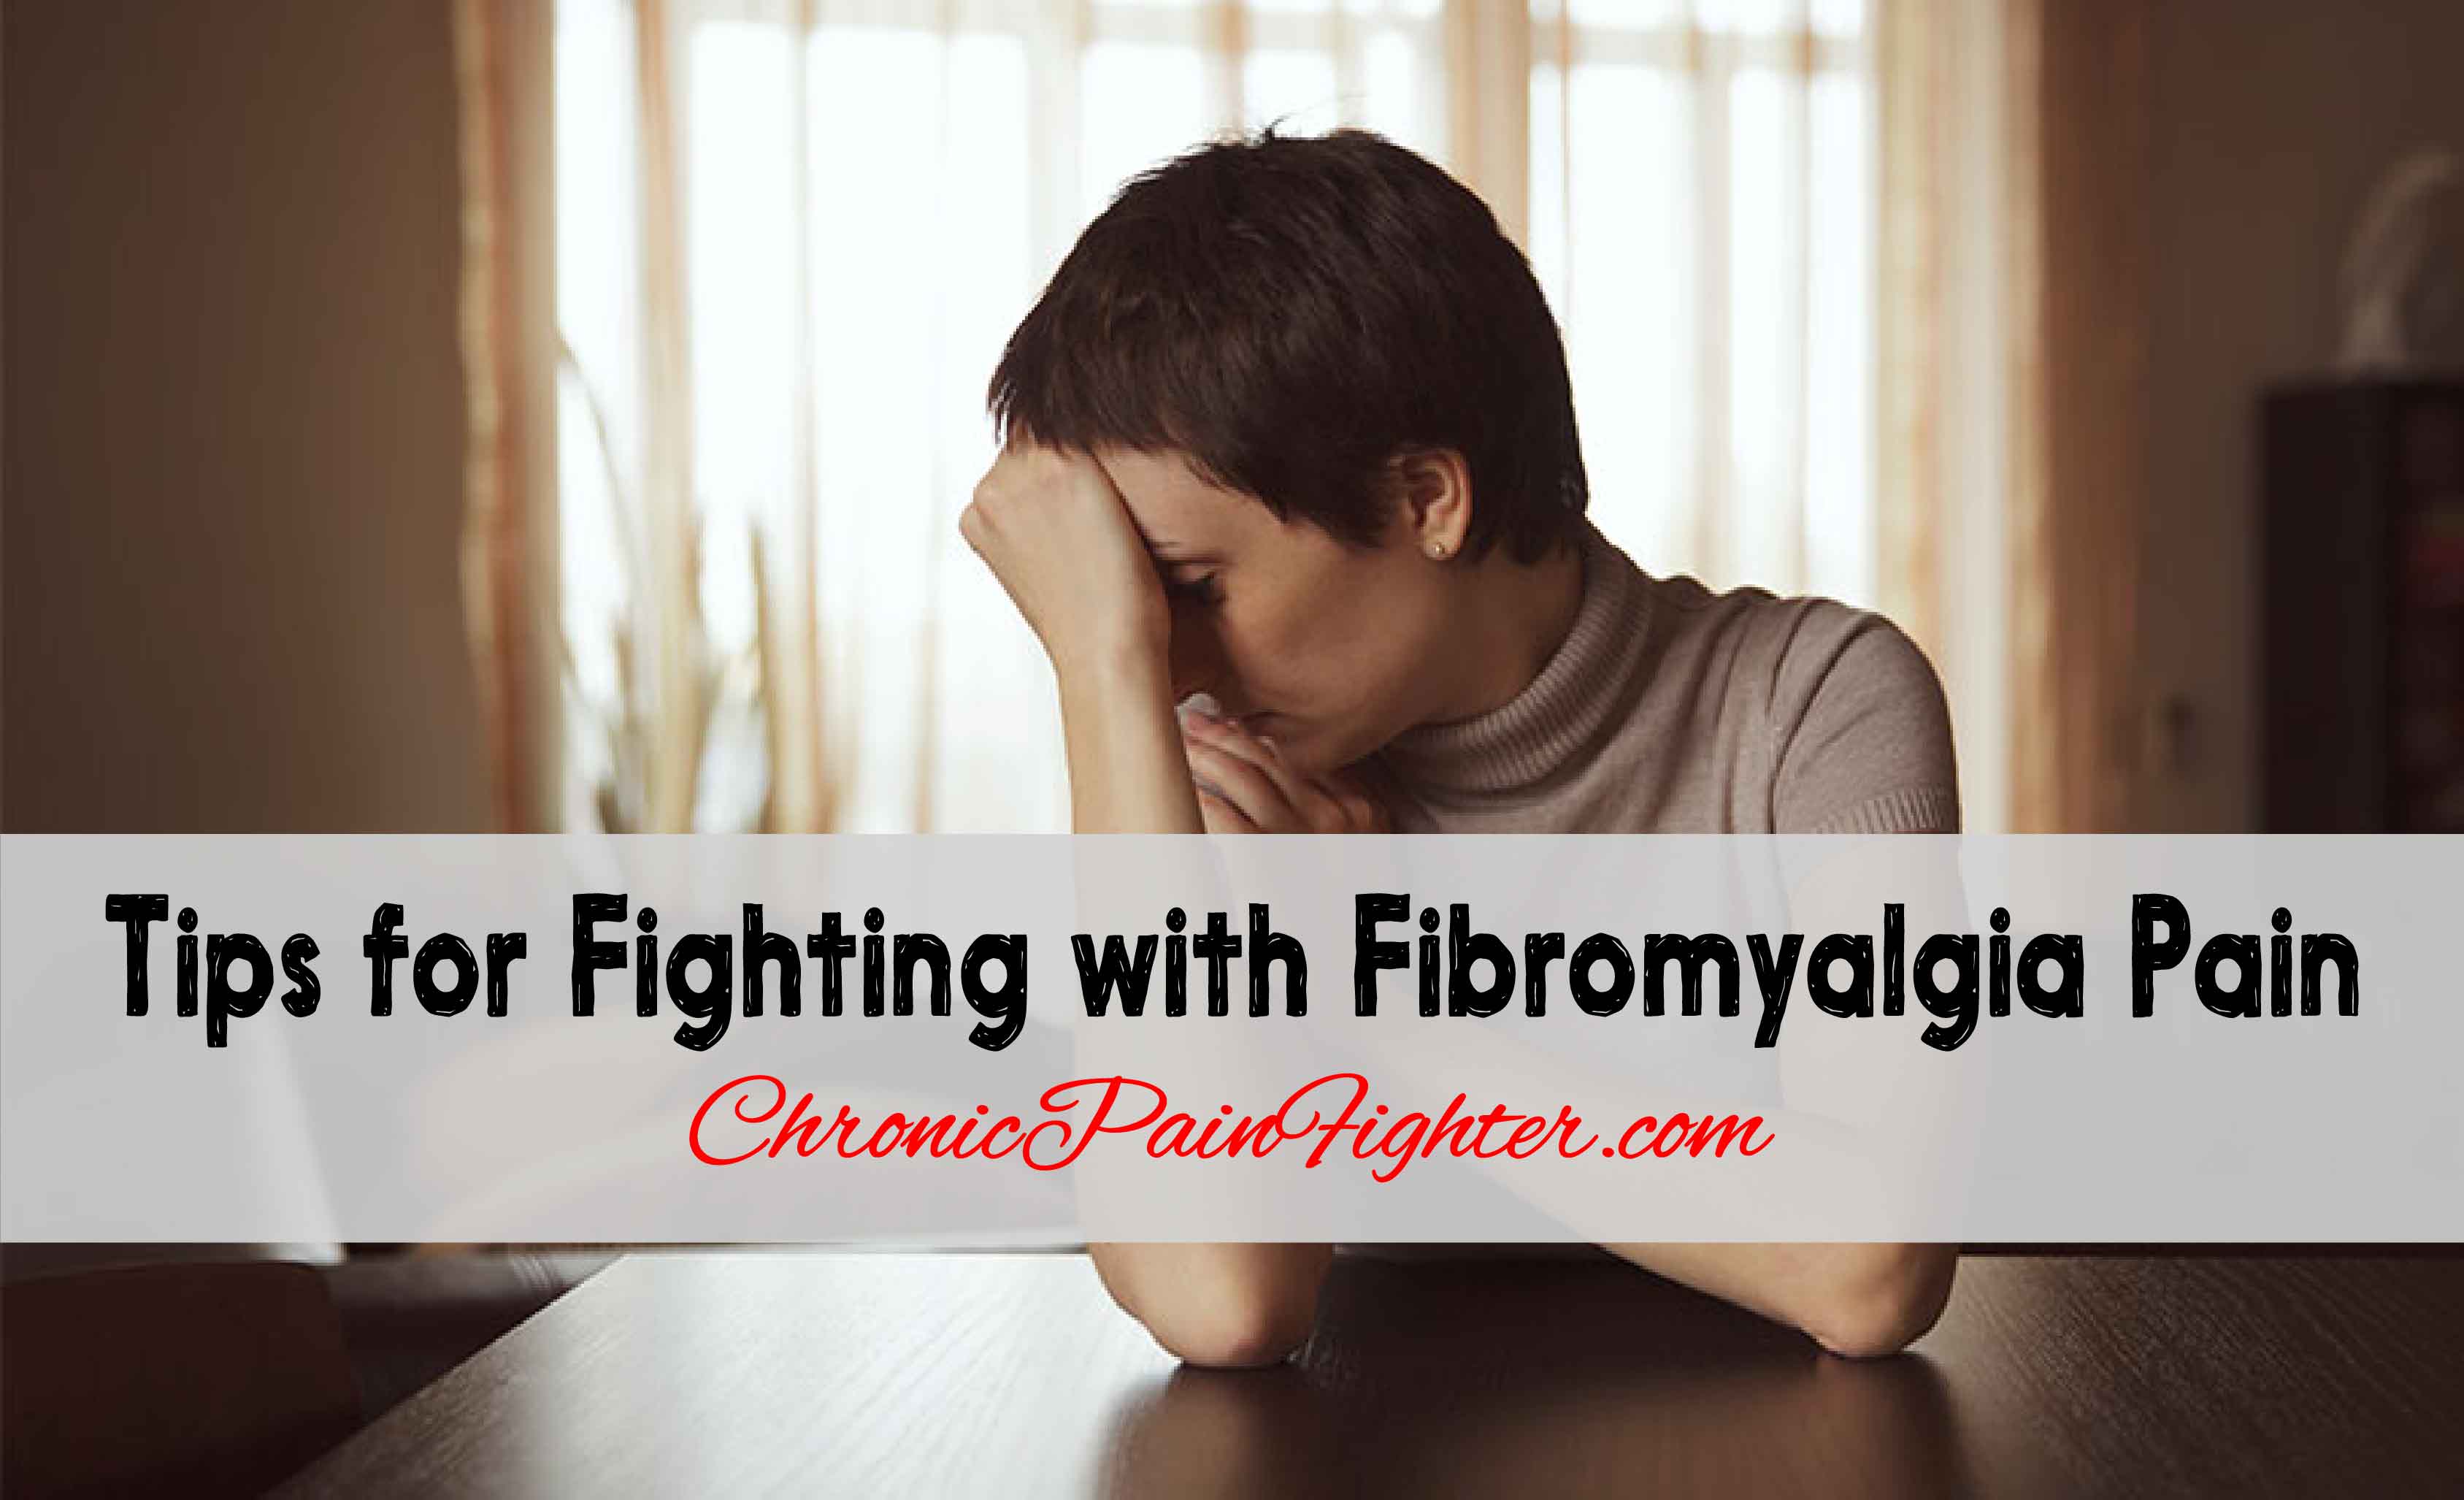 Tips for Fighting with Fibromyalgia Pain